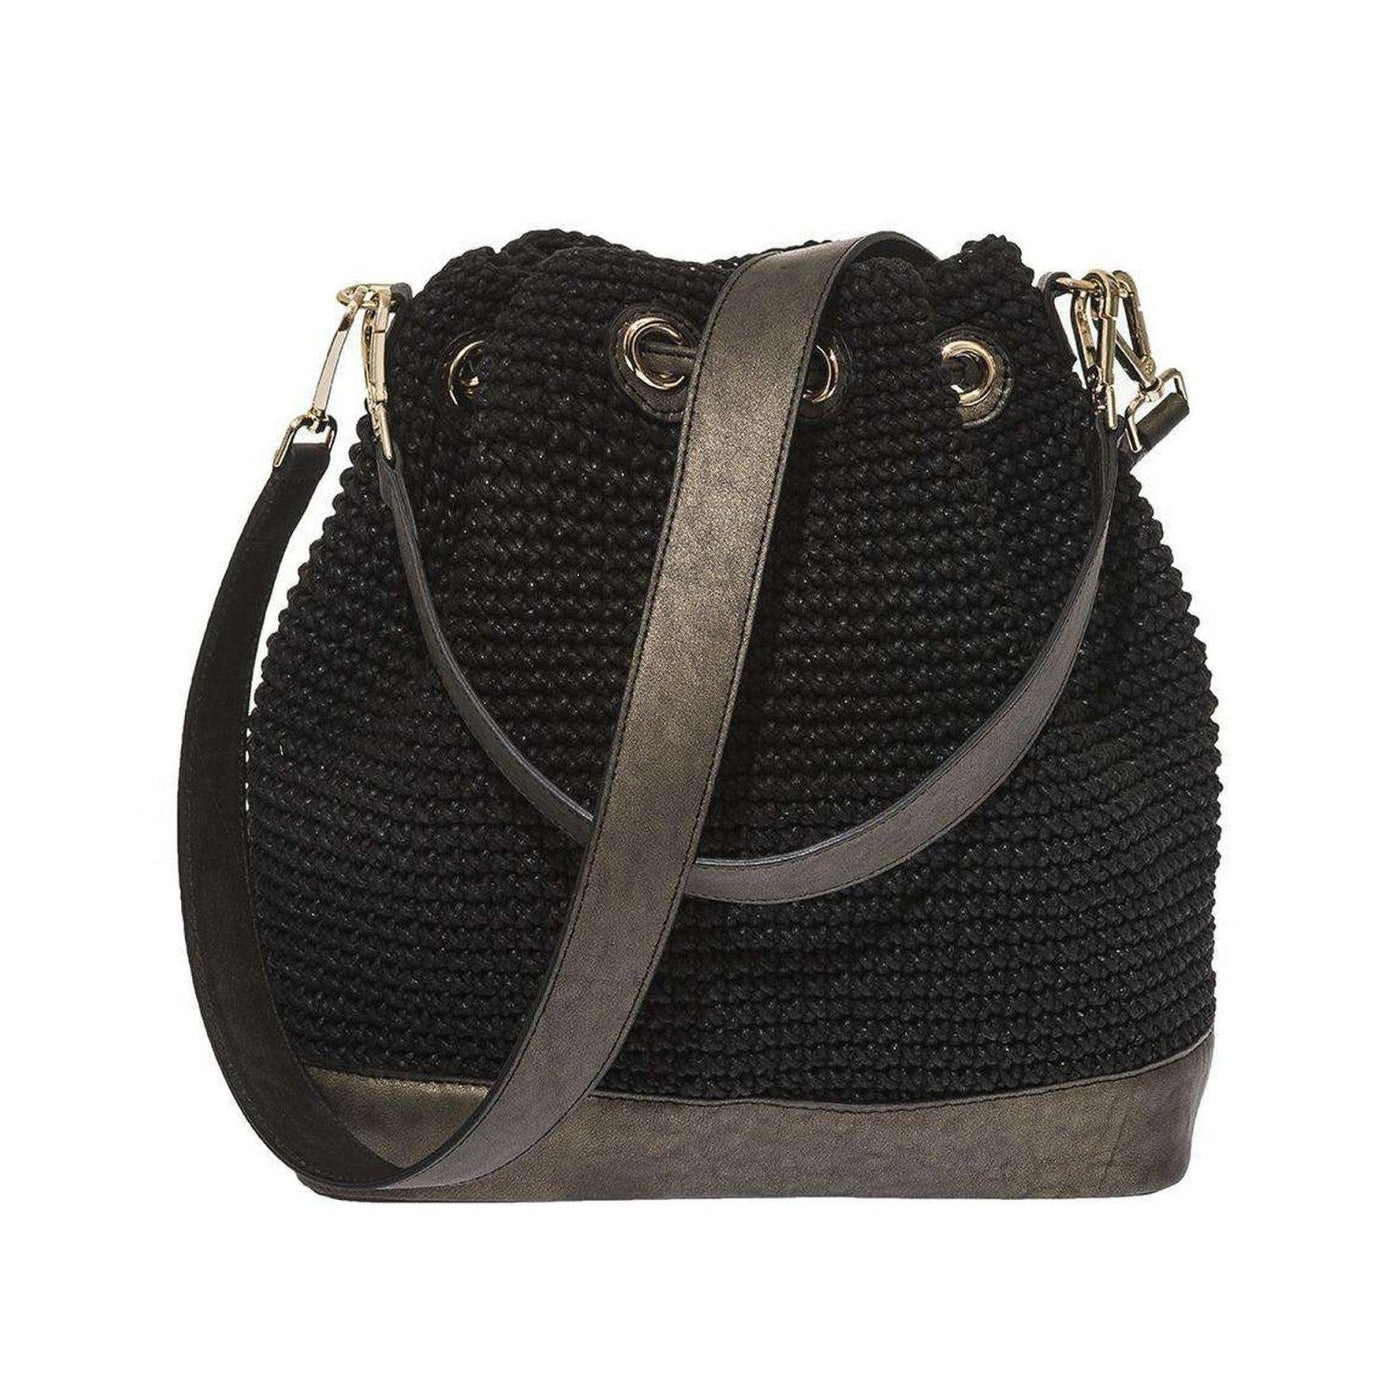 Shoulder Bag / Handbag Handmade Waxed Rope with Leather Straps - Ozzell London